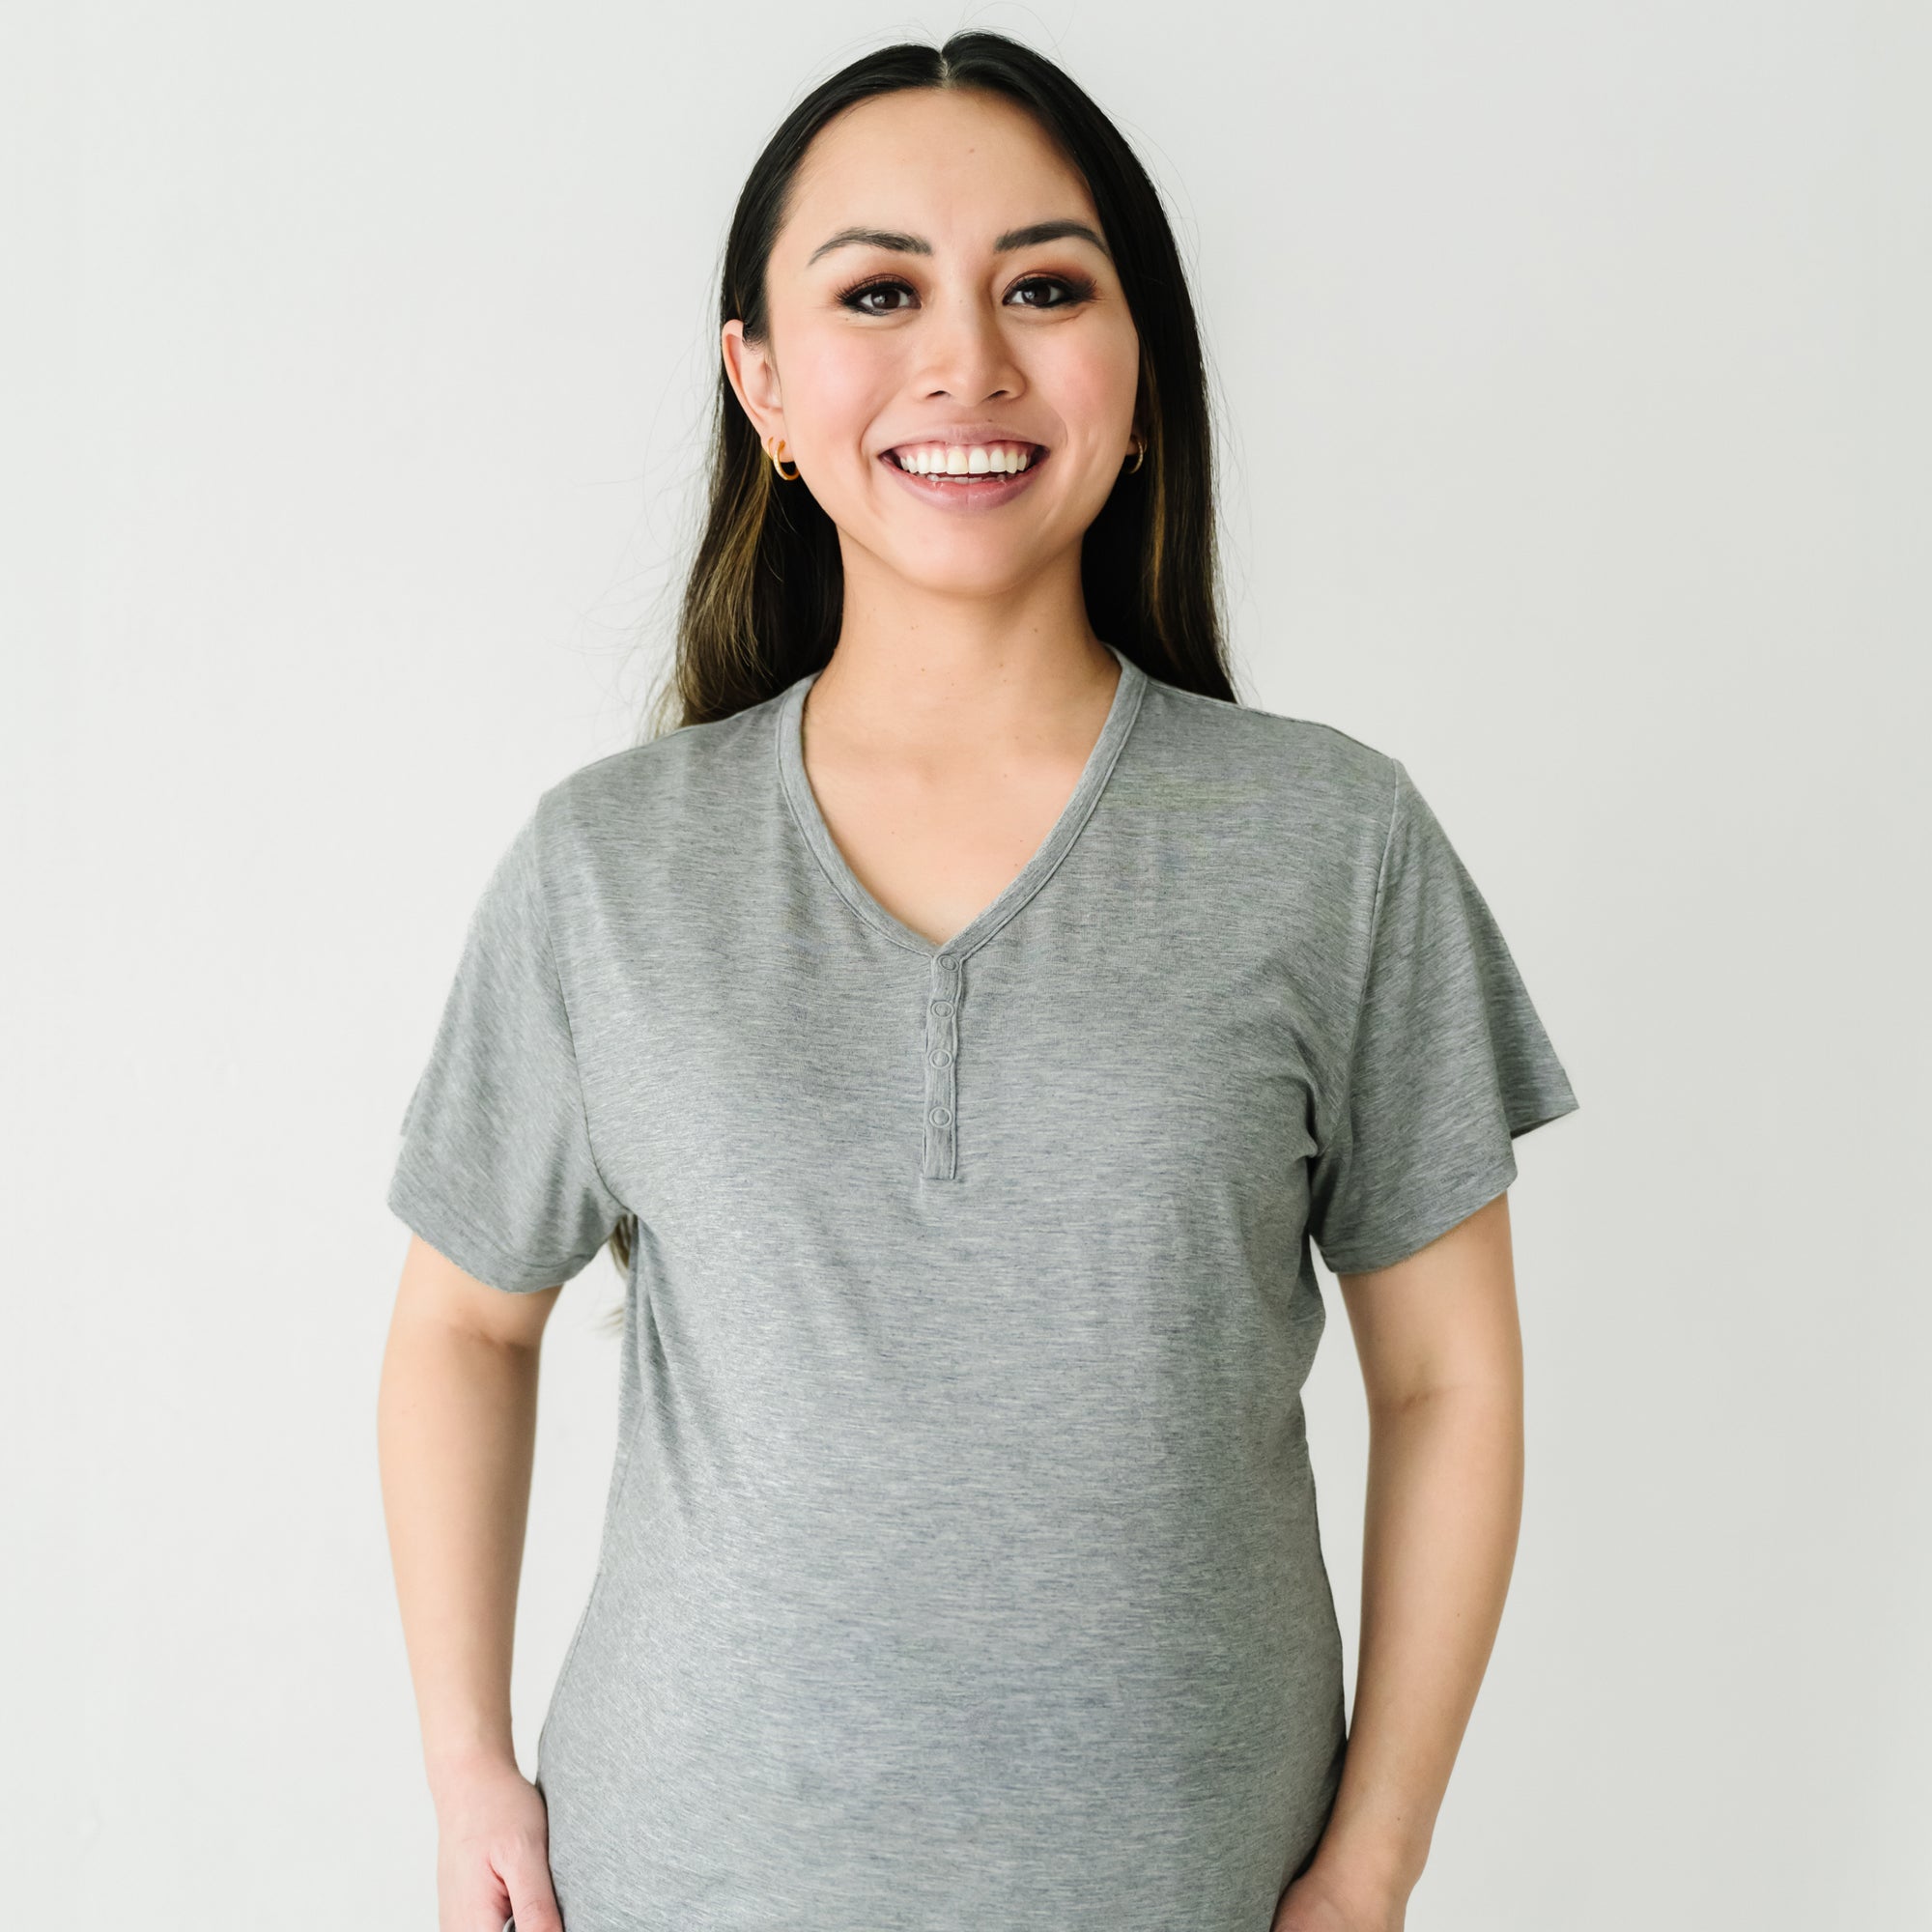 Close up image of a woman wearing a Heather Gray women's short sleeve pajama top